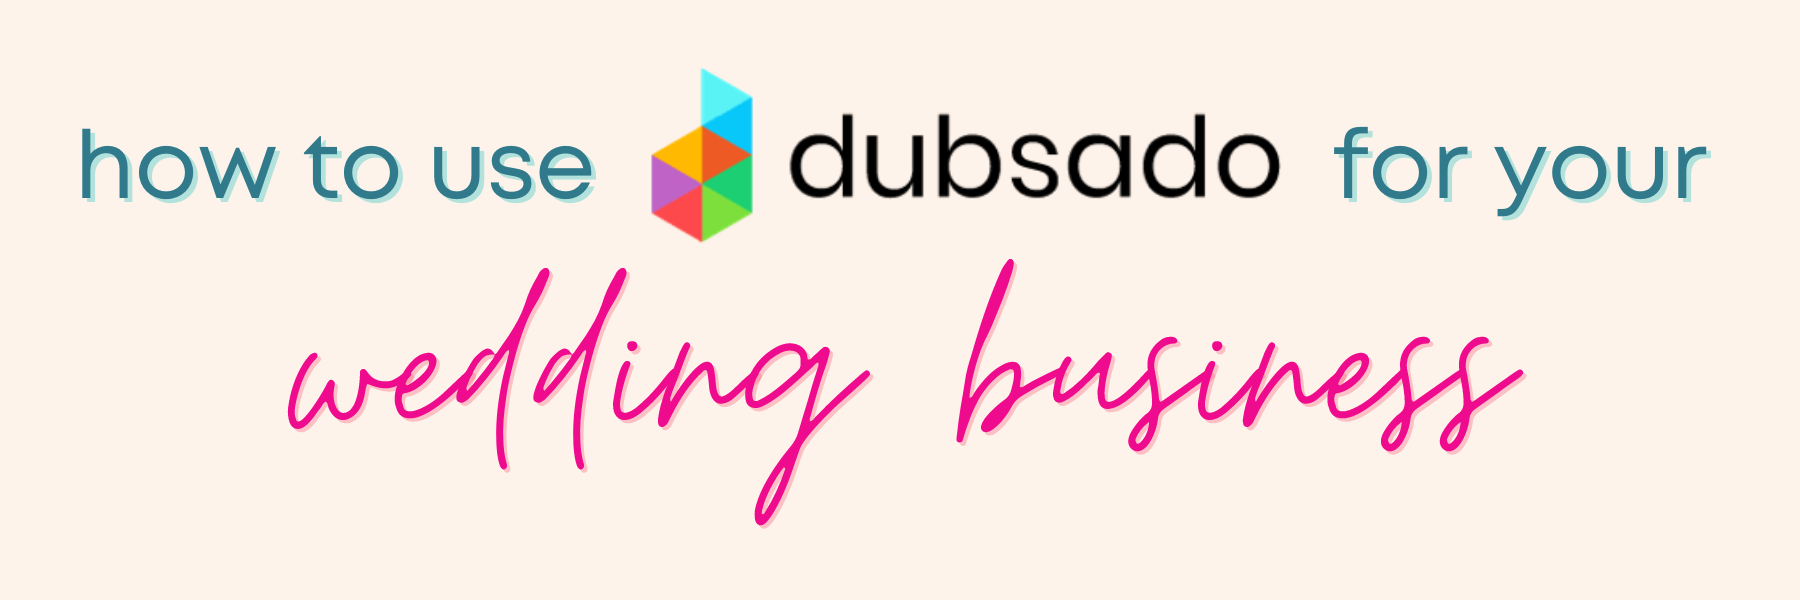 How to use Dubsado for your Wedding Business